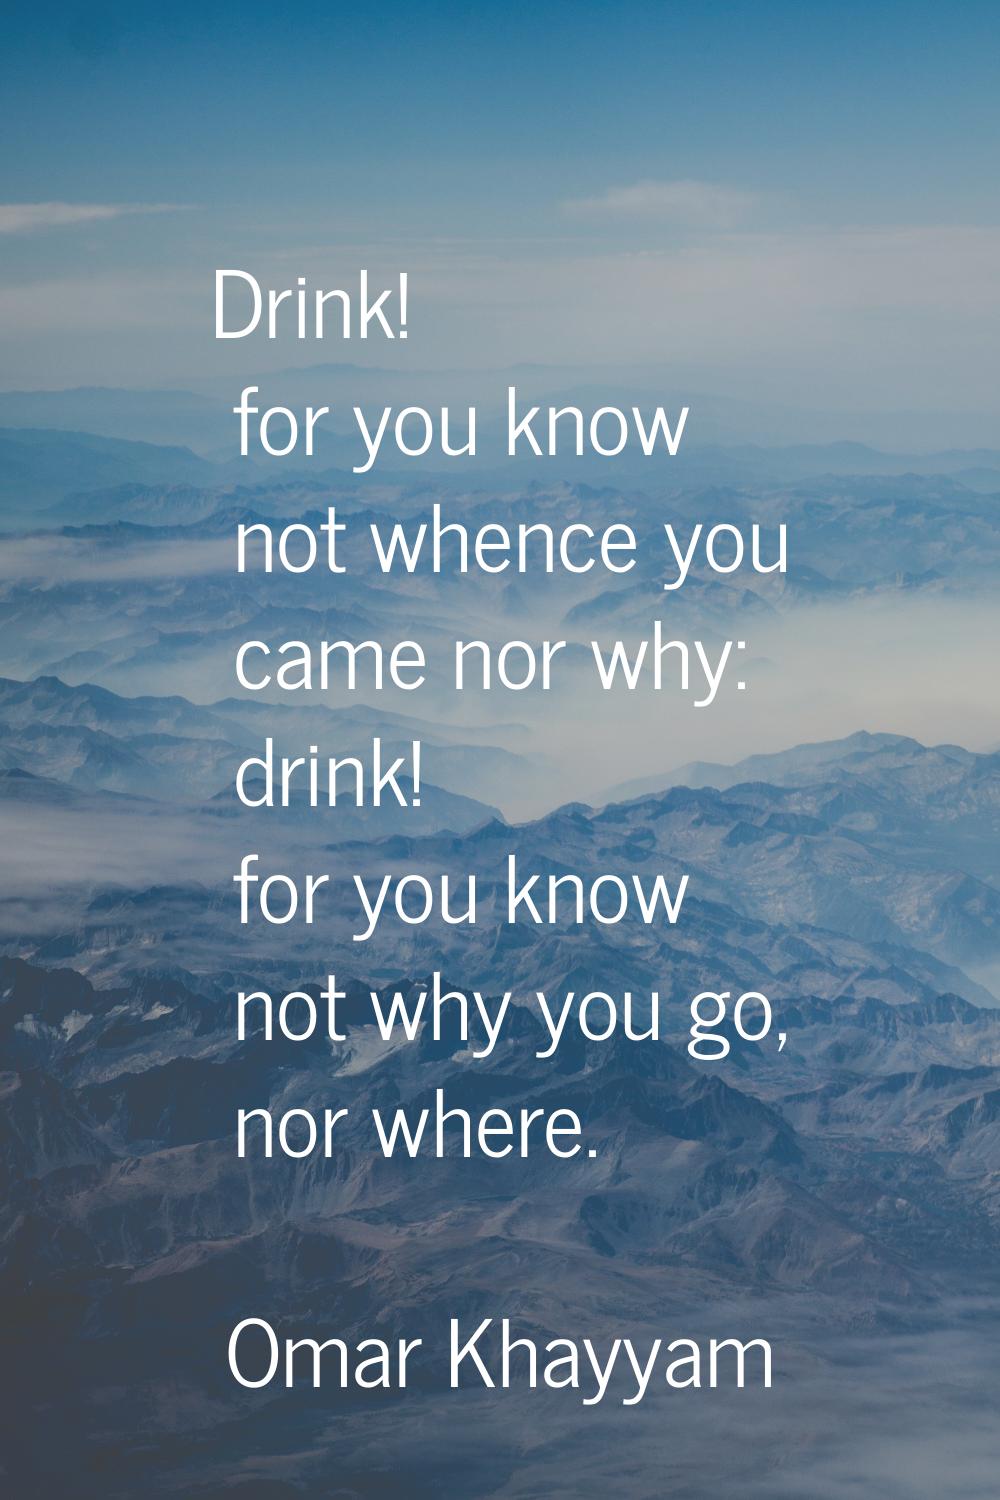 Drink! for you know not whence you came nor why: drink! for you know not why you go, nor where.